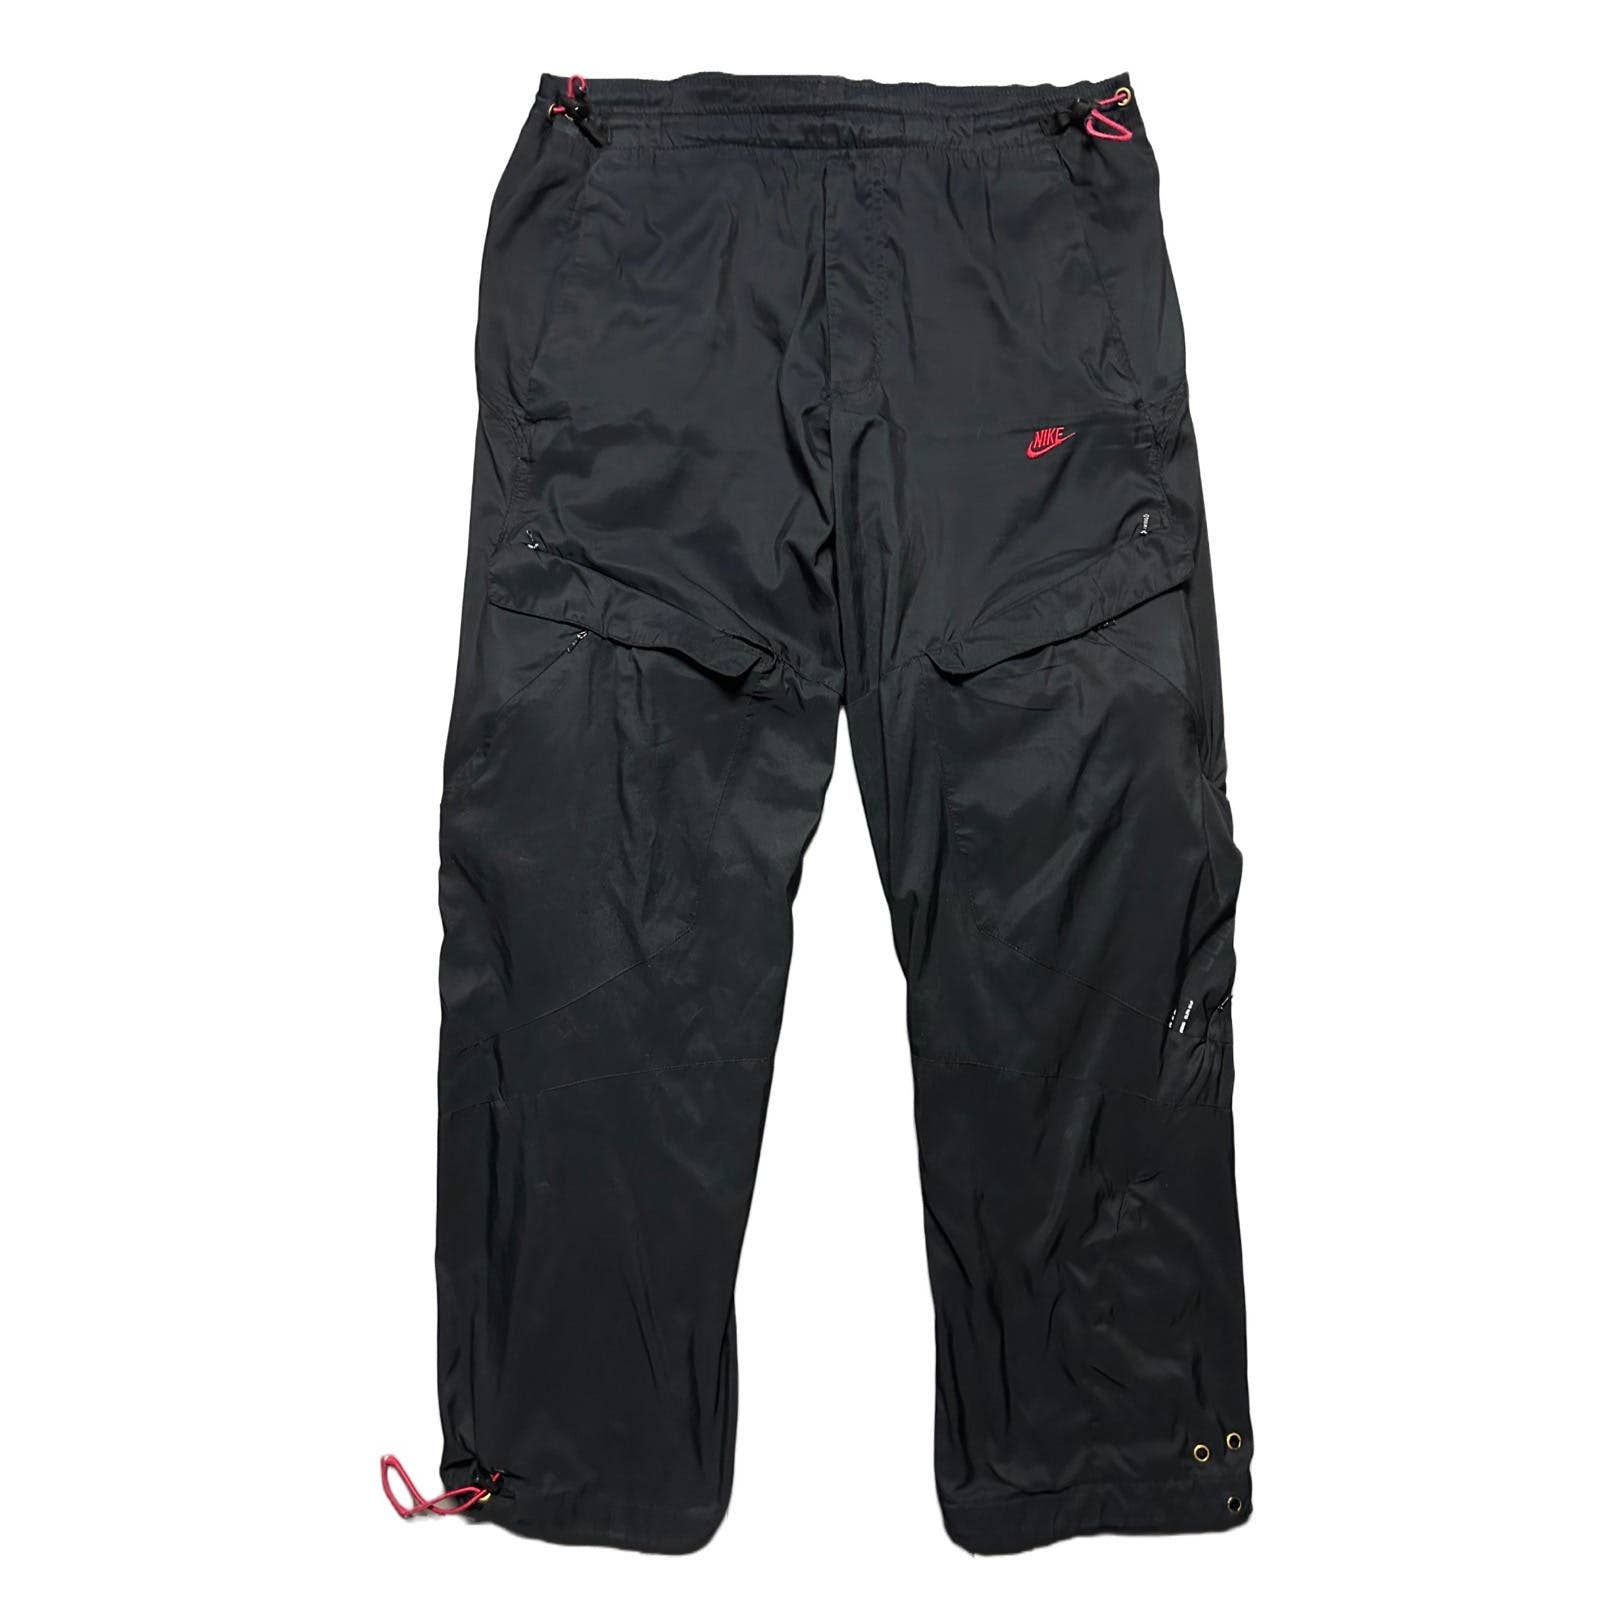 Nike vintage nylon black red track pants cargo parachute AIR – Refitted